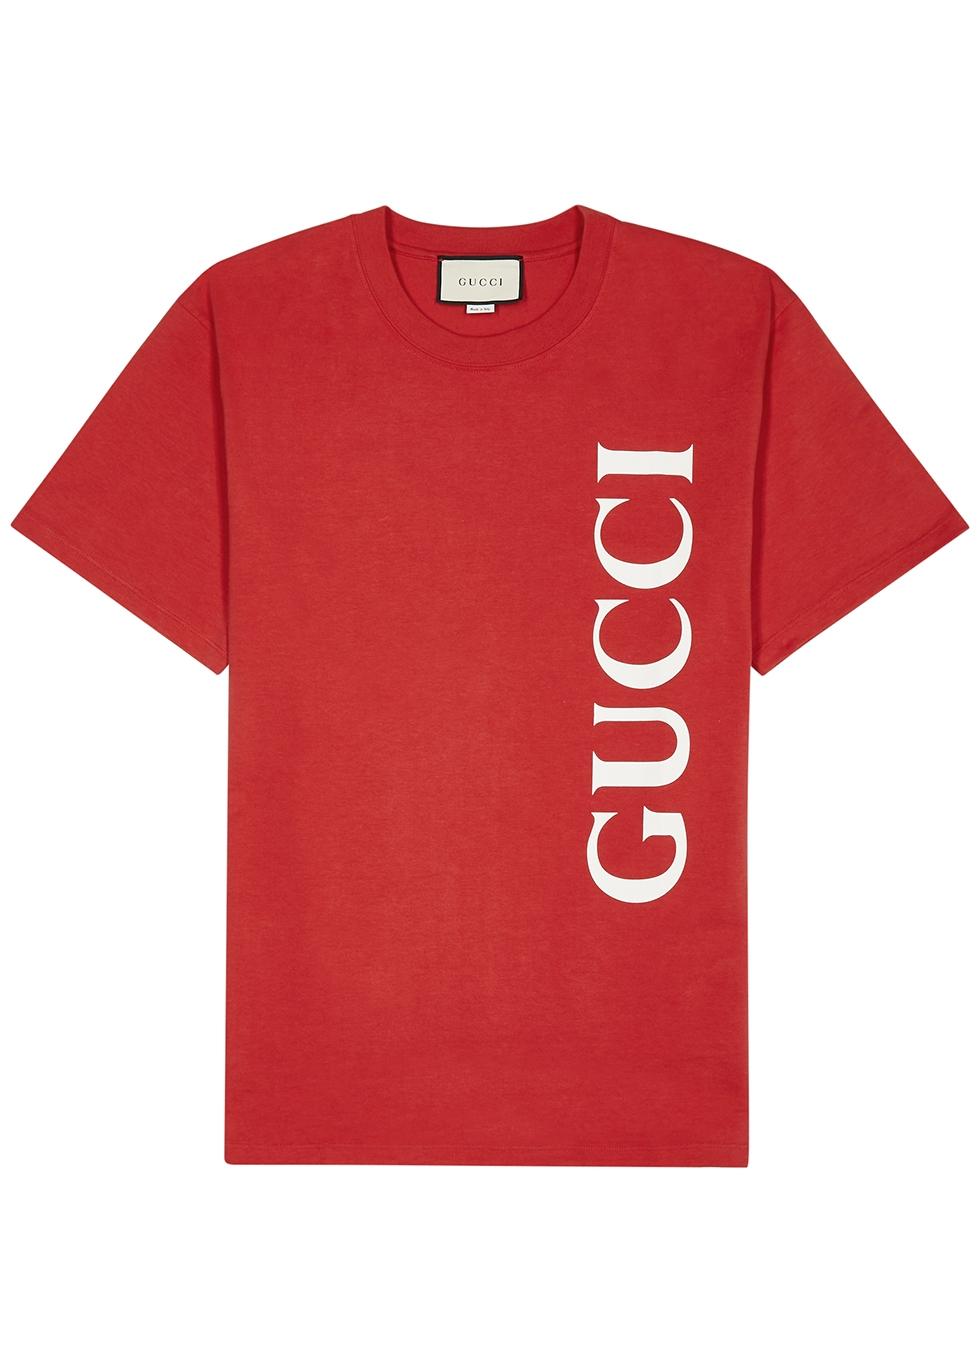 Gucci Red Logo Cotton T-shirt for Men - Lyst